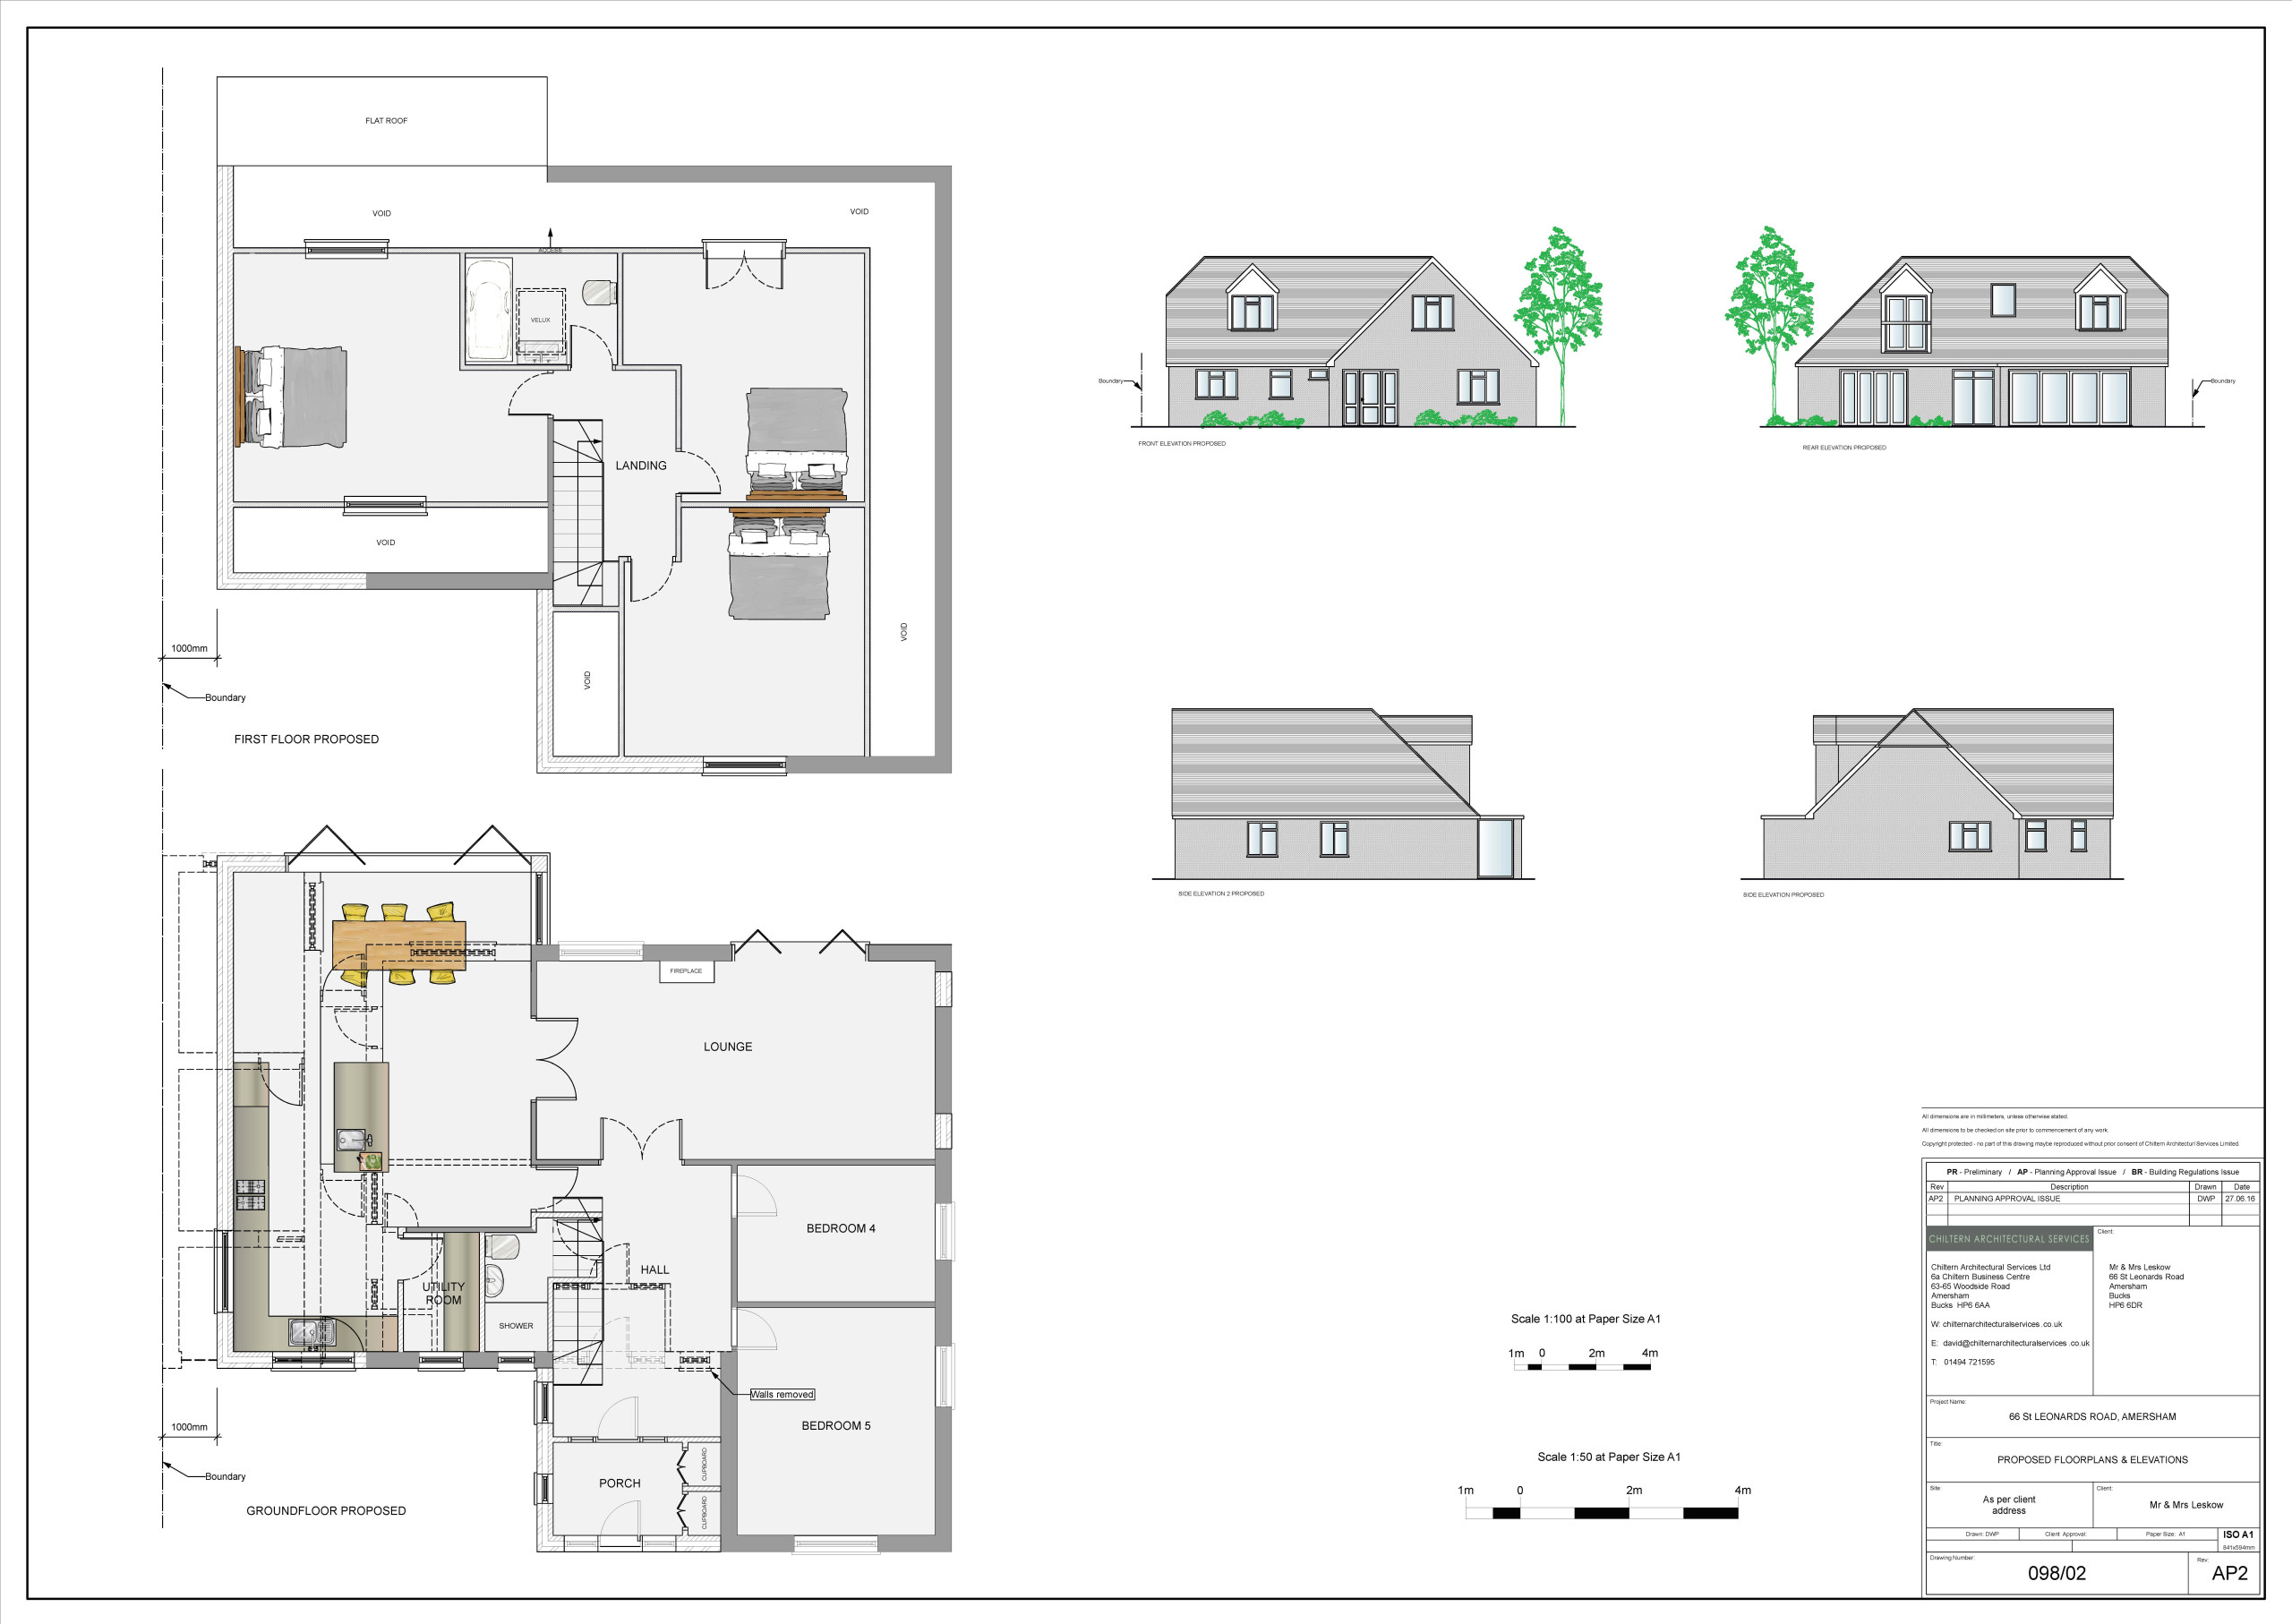 Approved plans for Bungalow Conversion